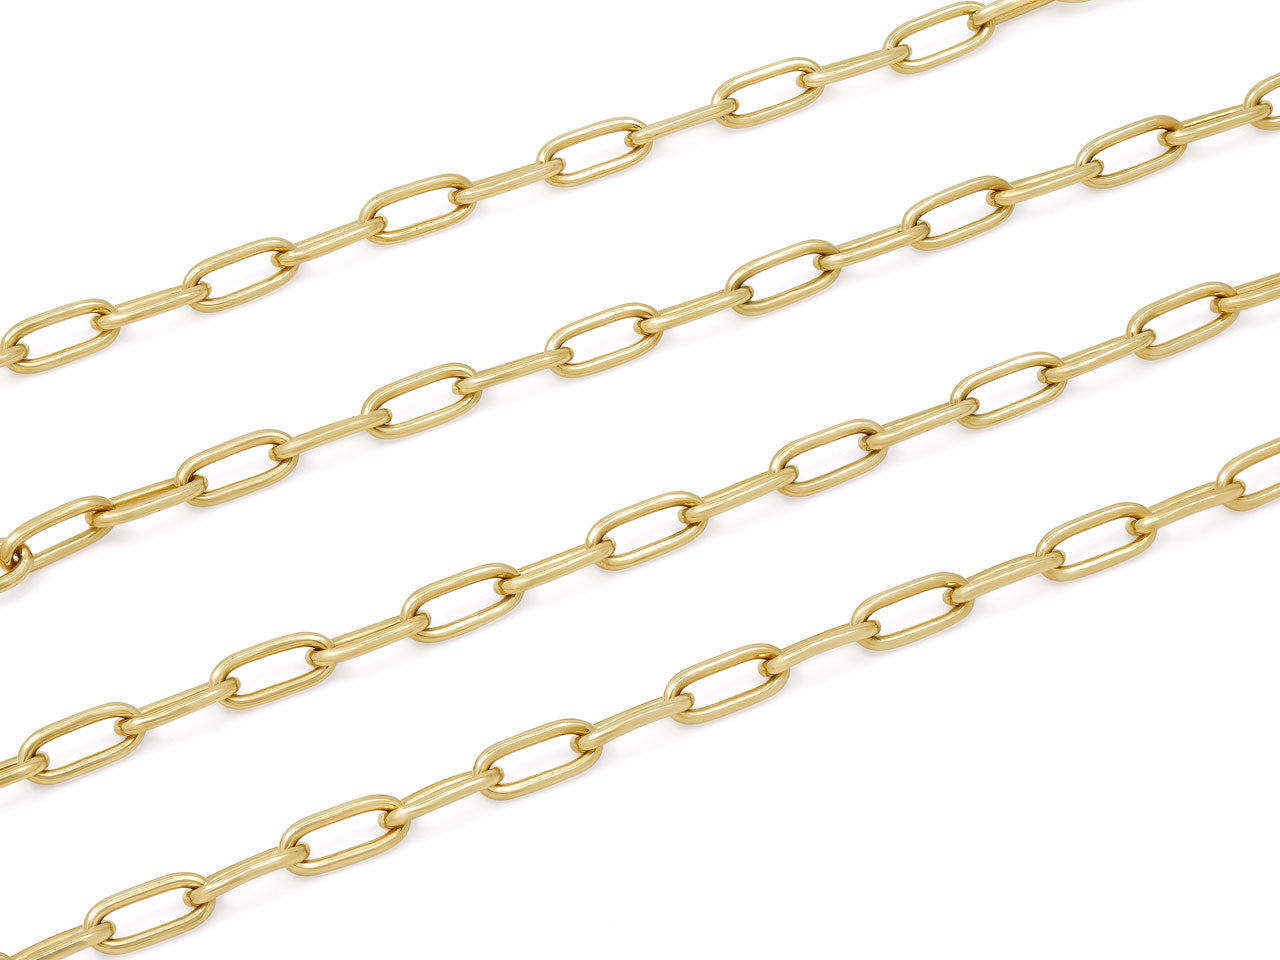 Italian Cable Link Chain in 18K Gold, Long, by Beladora